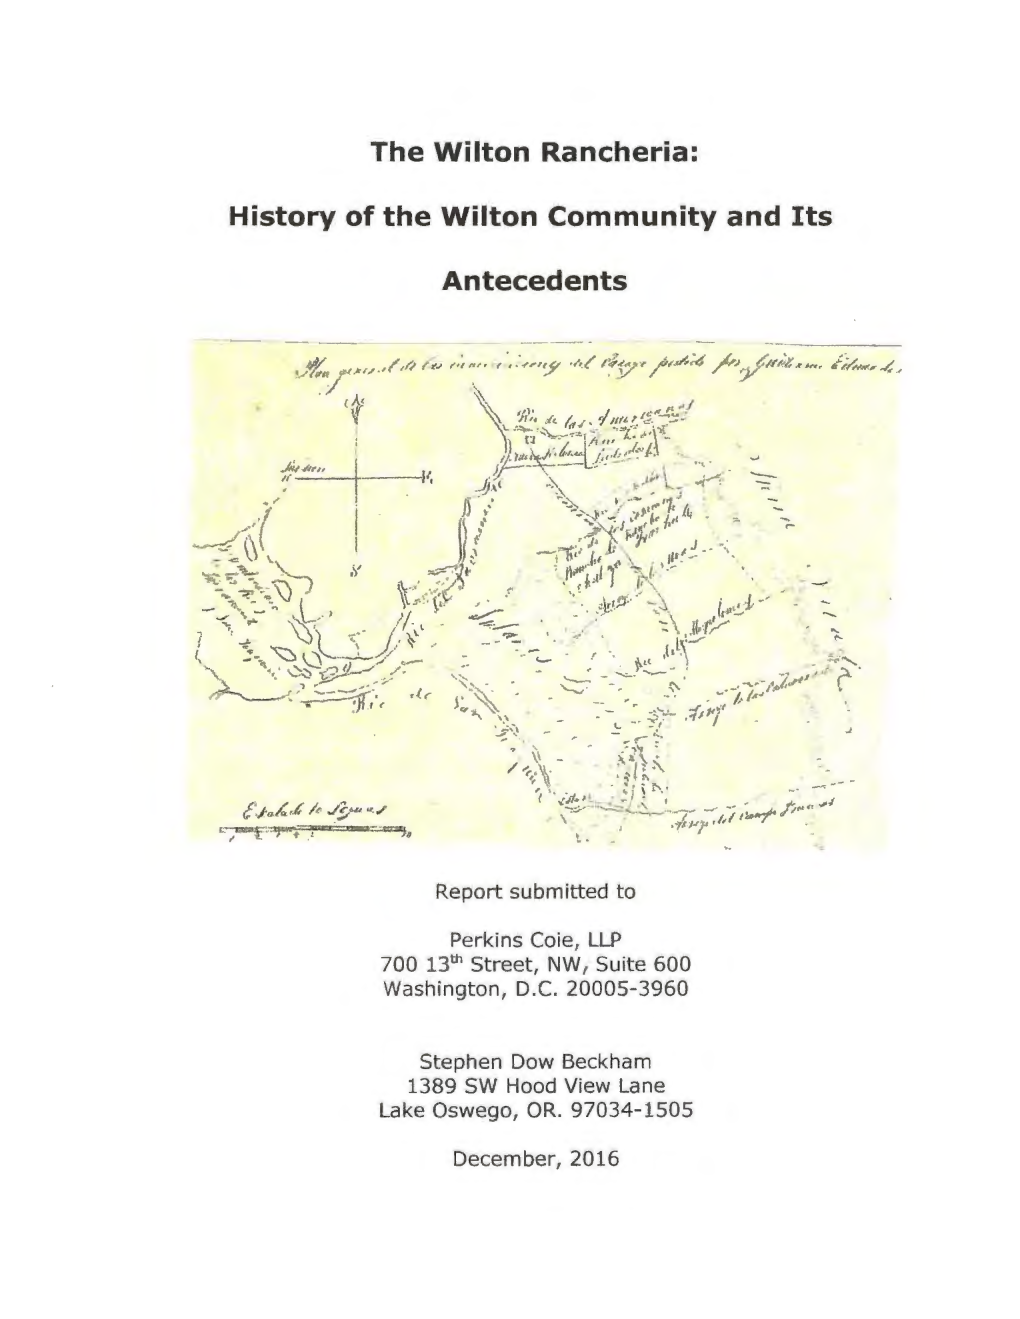 History of the Wilton Community and Its Antecedents